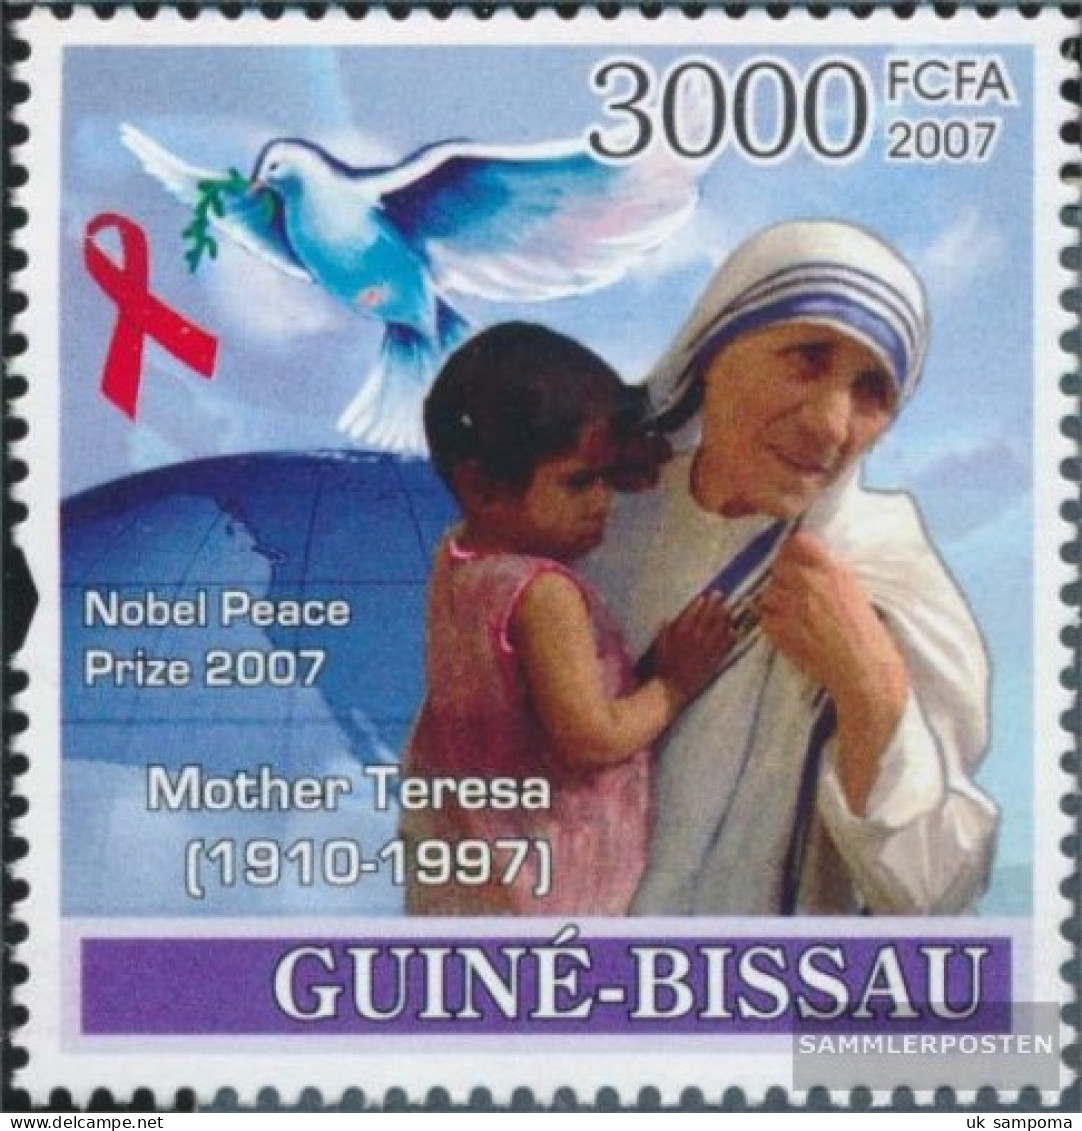 Guinea-Bissau 3622 (complete. Issue) Unmounted Mint / Never Hinged 2007 Fight Against Aids / Diana Etc. - Guinea-Bissau